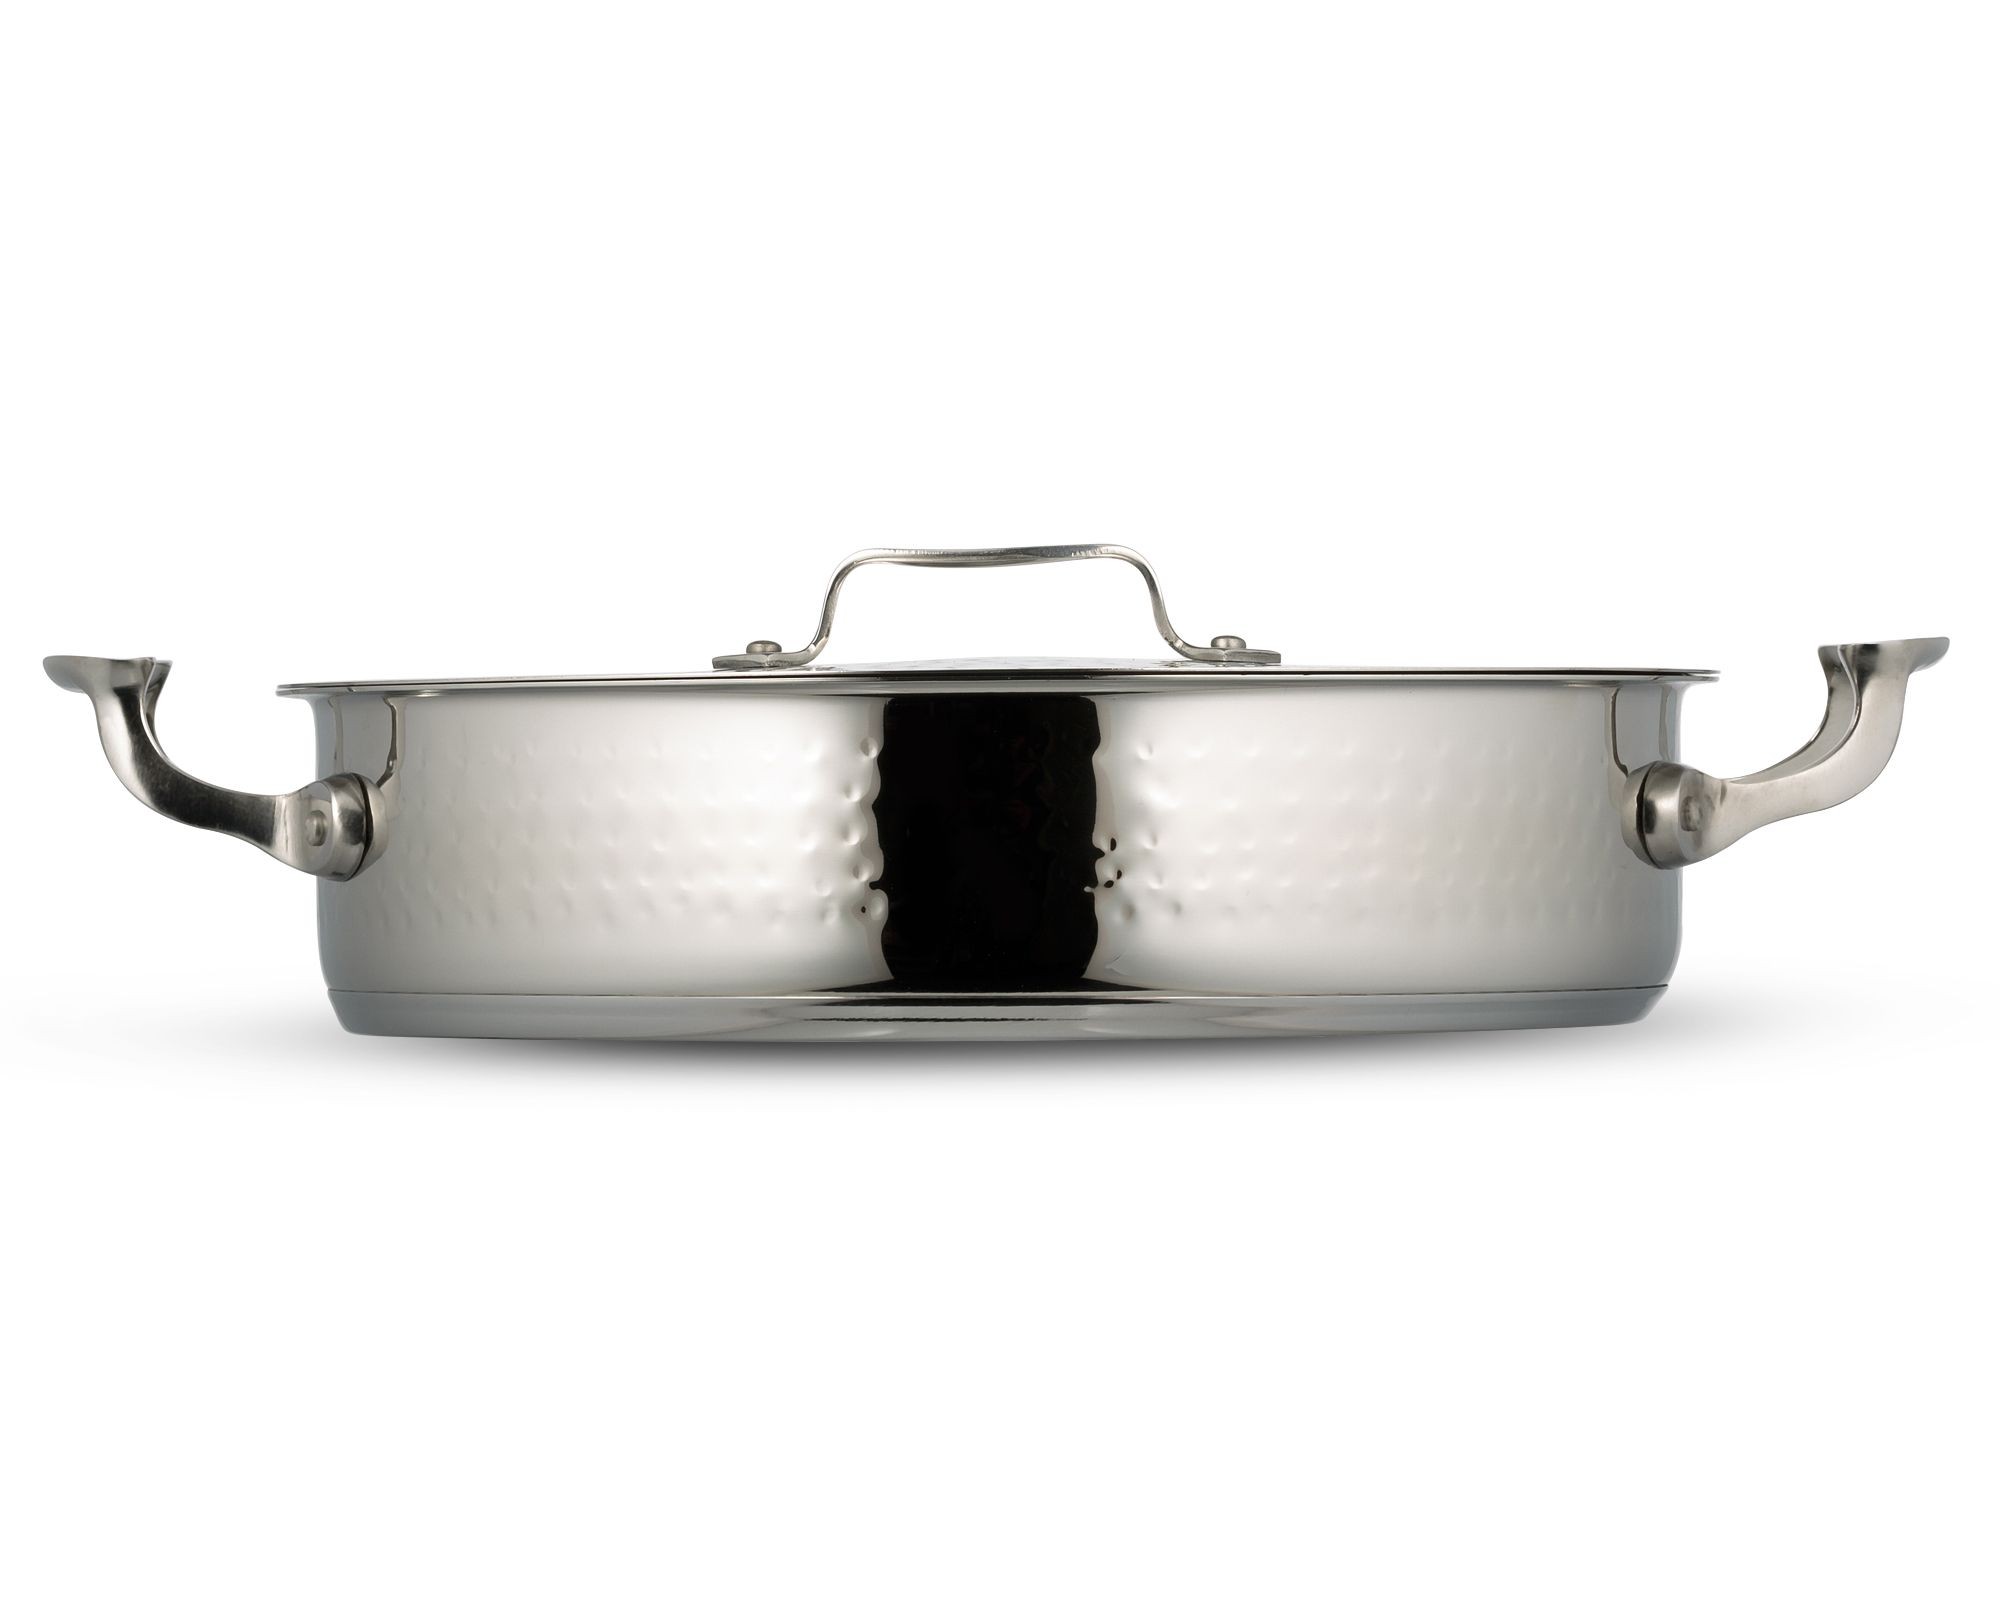 Bon Chef 60030HF Cucina Stainless Steel Pot with Cover, Hammered Finish, 6 Qt.